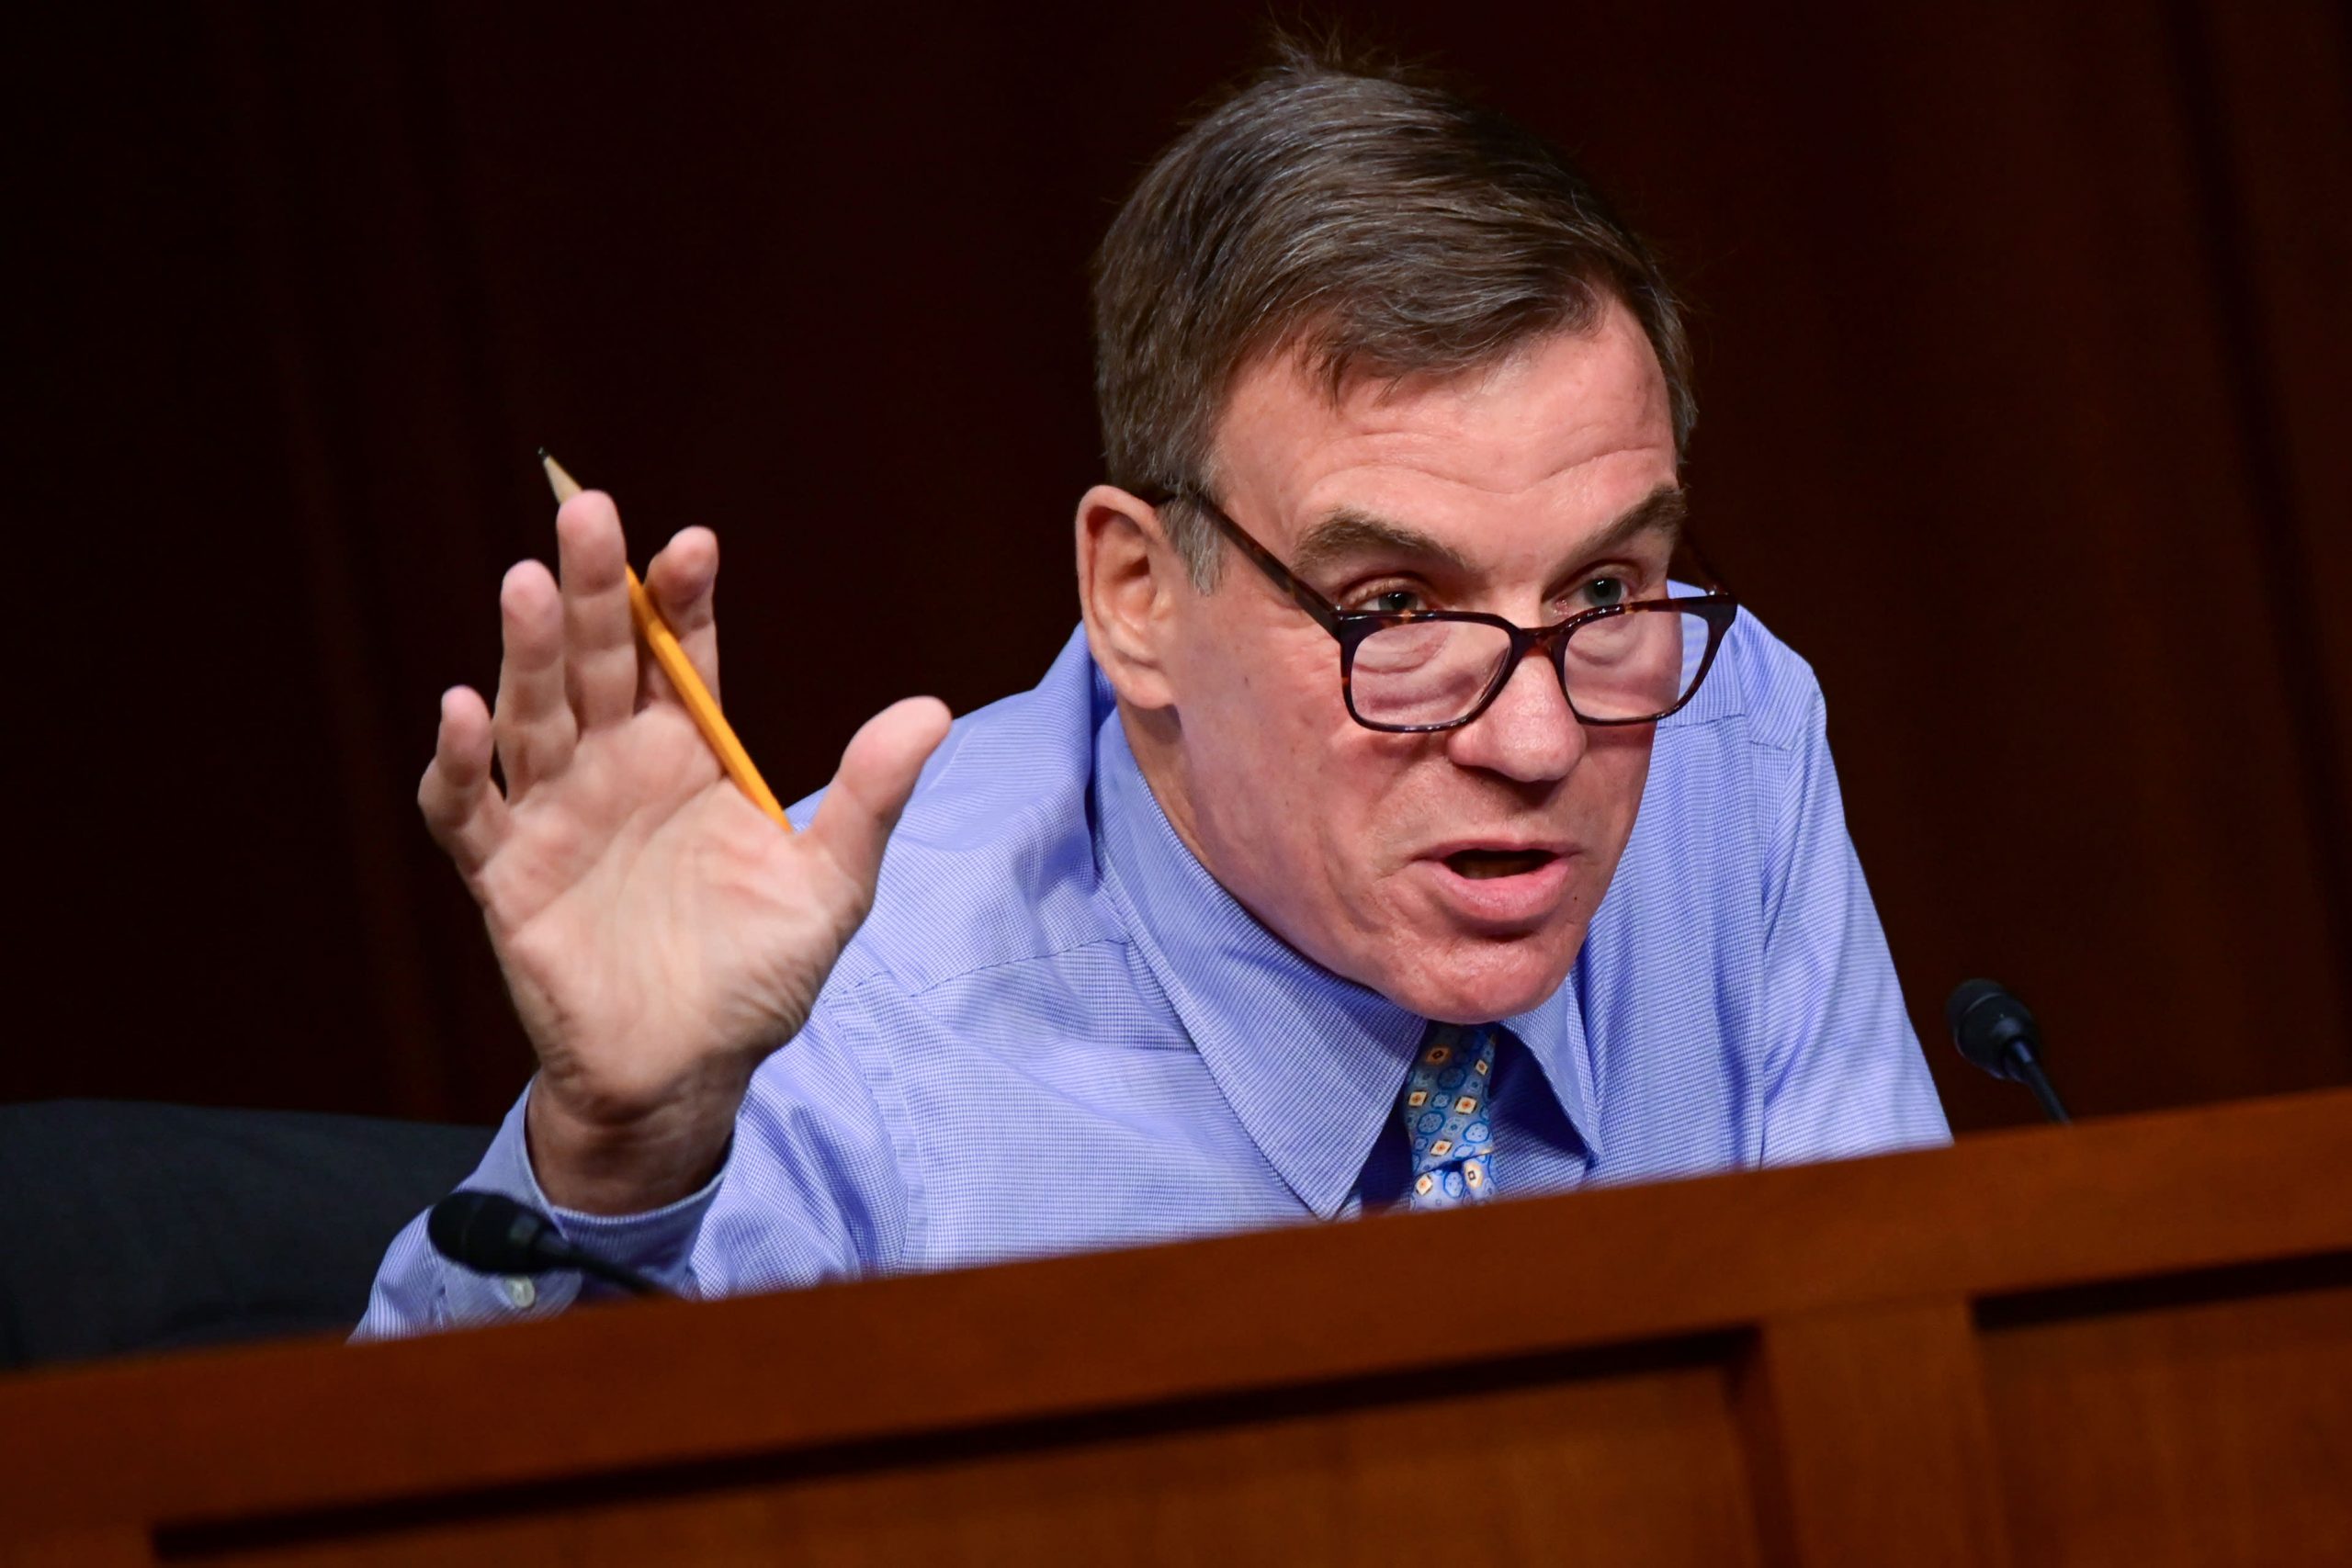 Sen. Warner introduces Section 230 bill that would make it easier to sue social media platforms